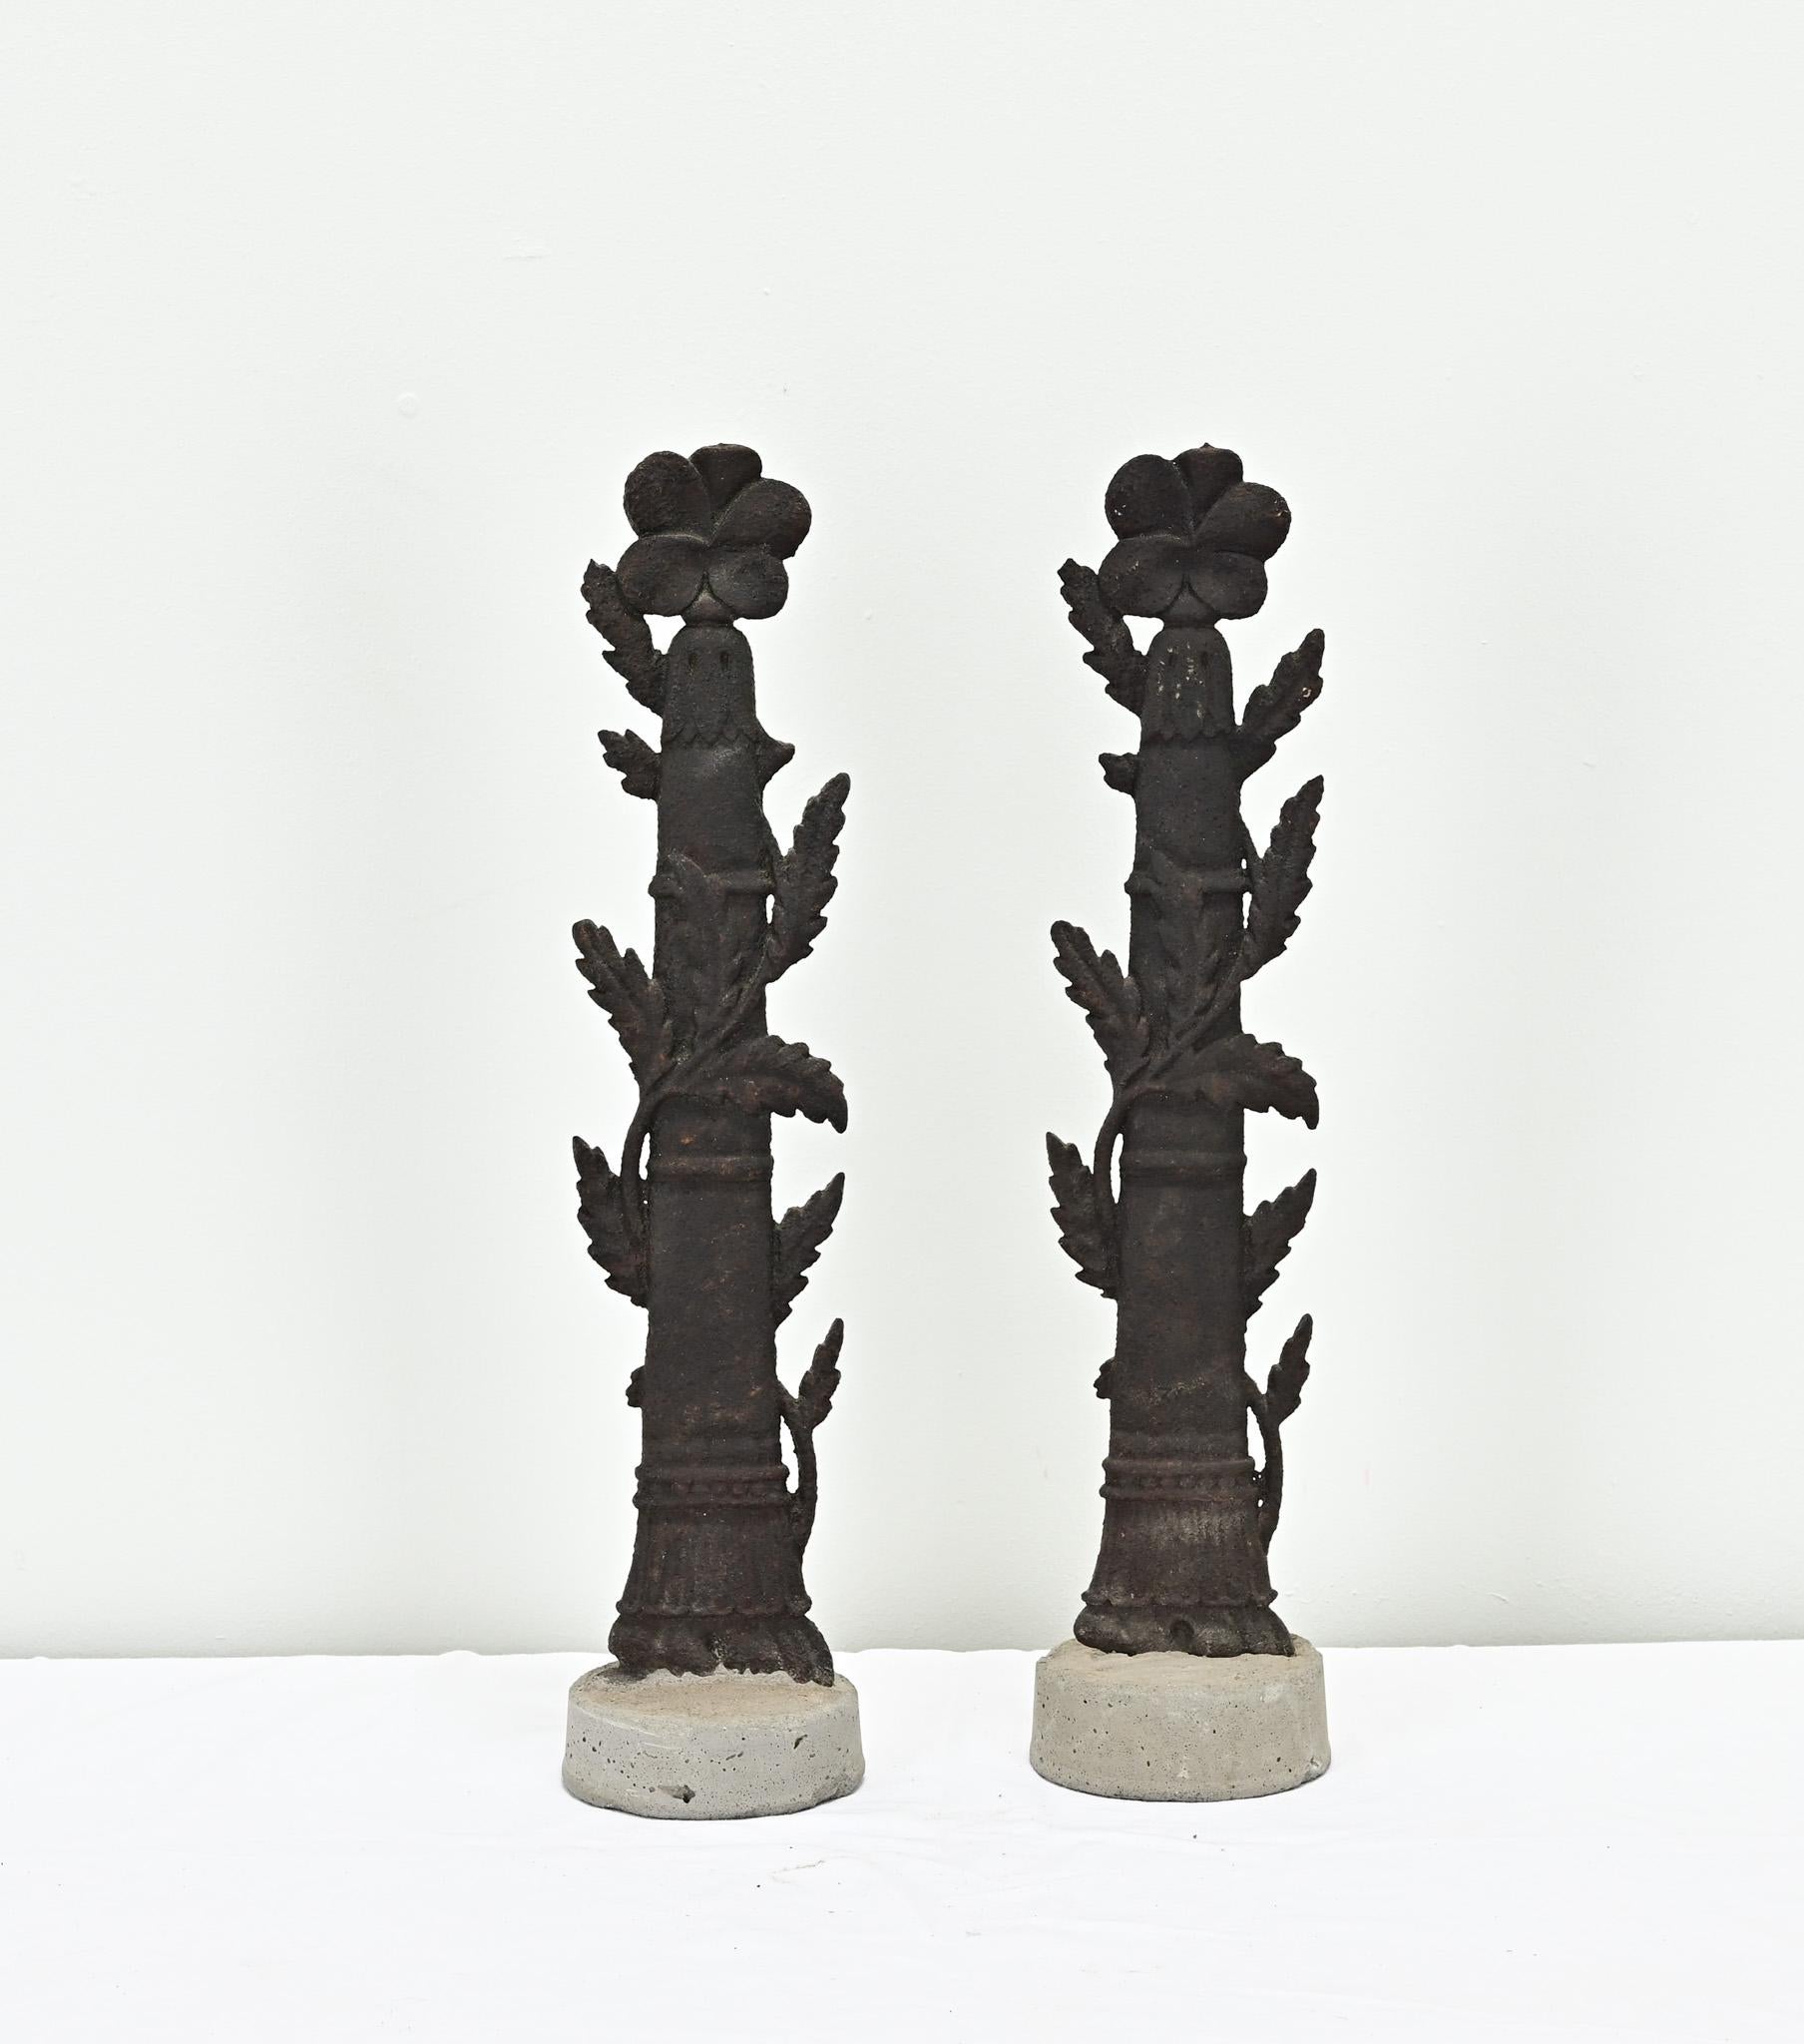 A rare pair of French cast iron fence post fragments dating back to the 1300’s. A long sprouting flower is wrapped around the flat column post, recently set in concrete bases. Sold as a set only. Be sure to view the detailed images to see the